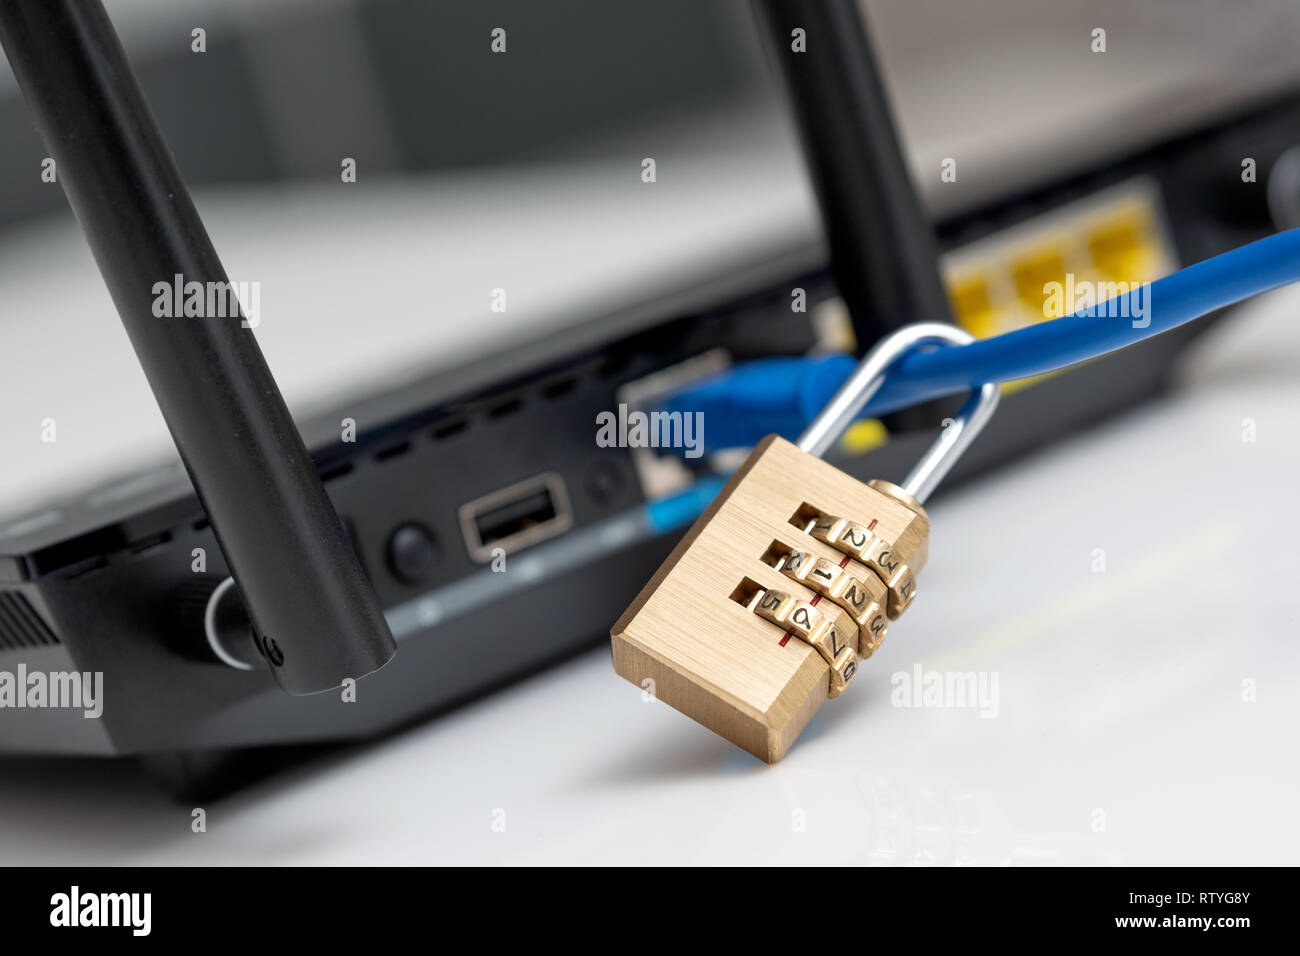 Network and data protection concept with padlock. Internet router or switch with cable plugged in. Stock Photo